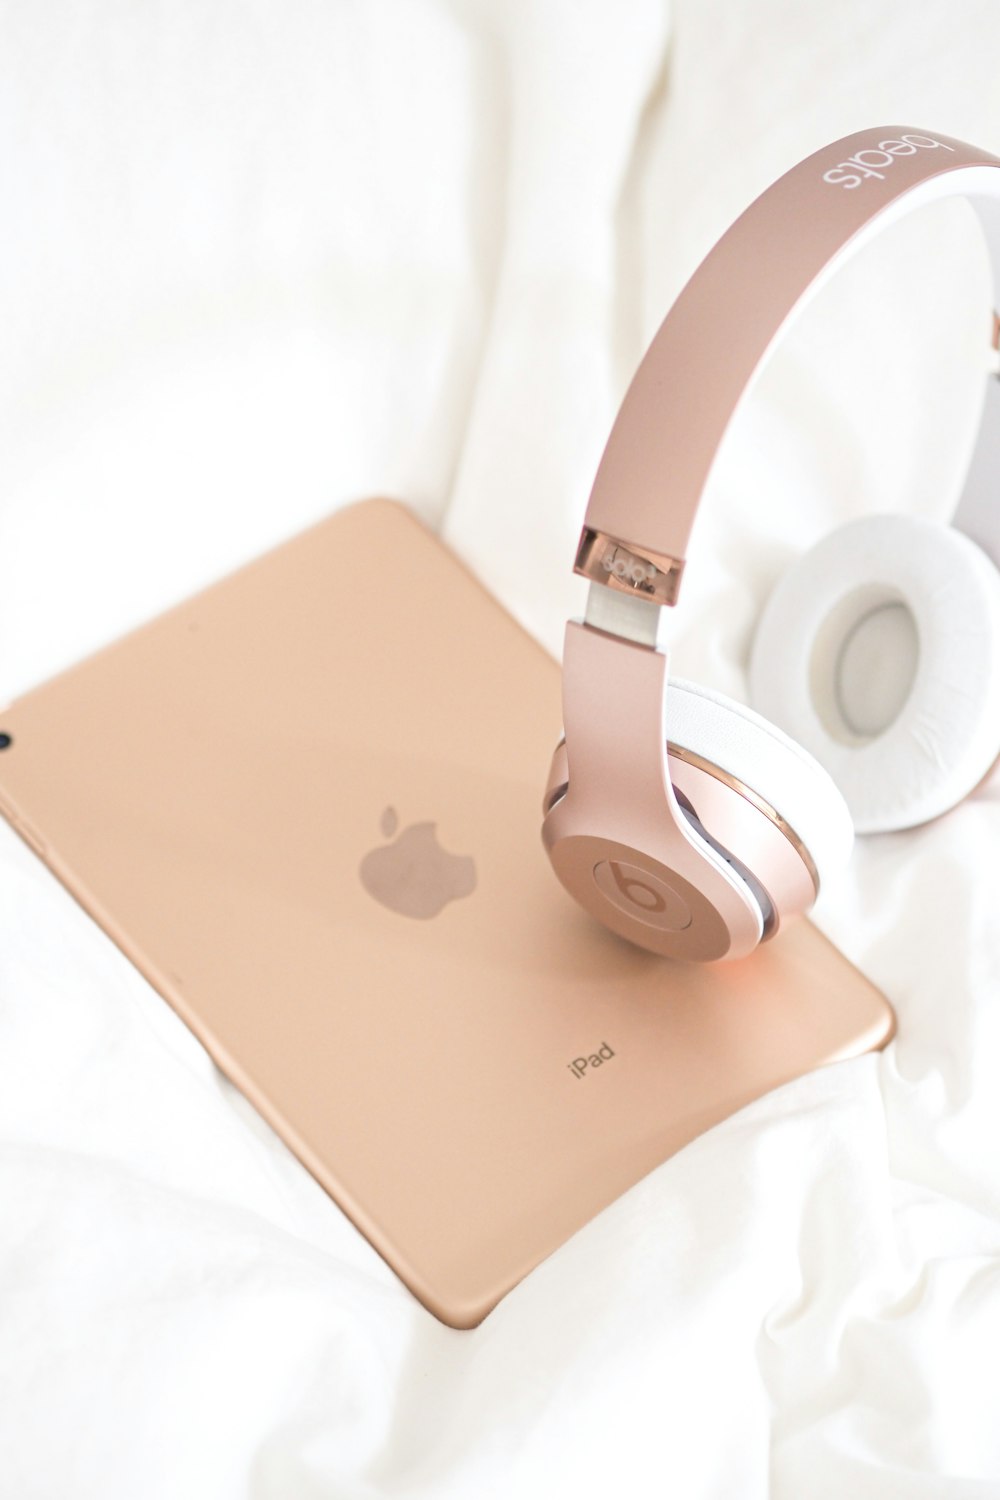 white beats by dr dre headphones on silver macbook